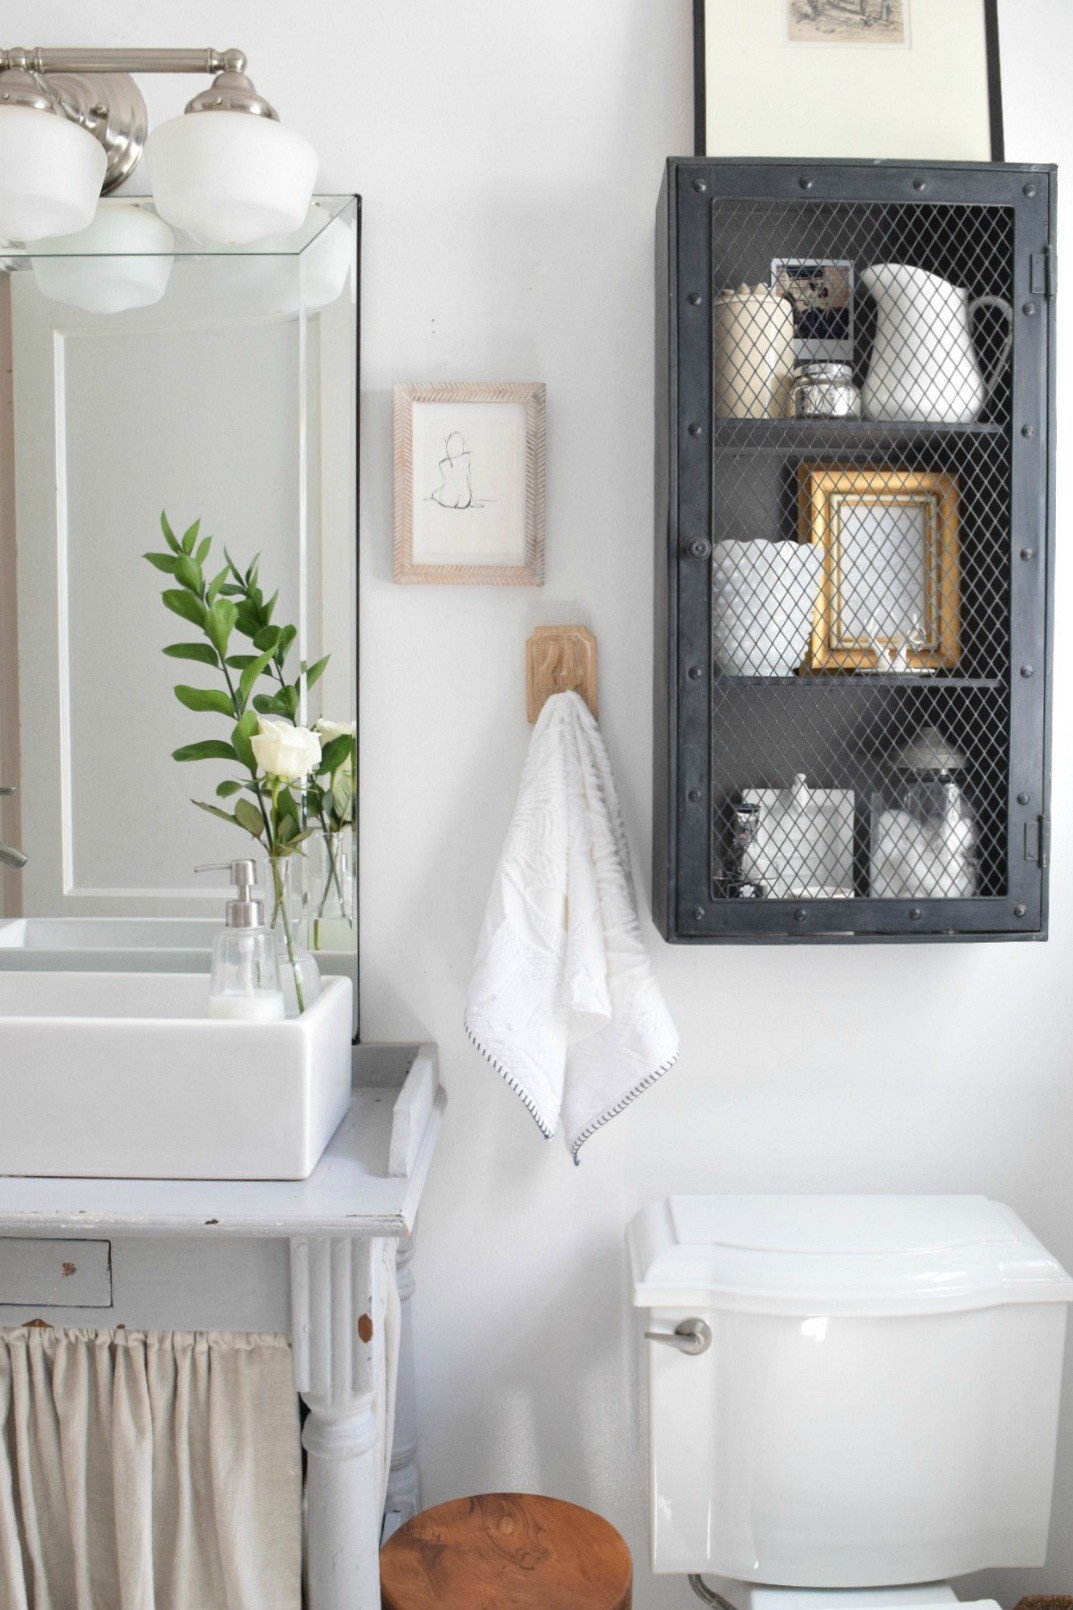 Bathroom Organizers For Small Bathrooms
 Small Bathroom Ideas and Solutions in our Tiny Cape